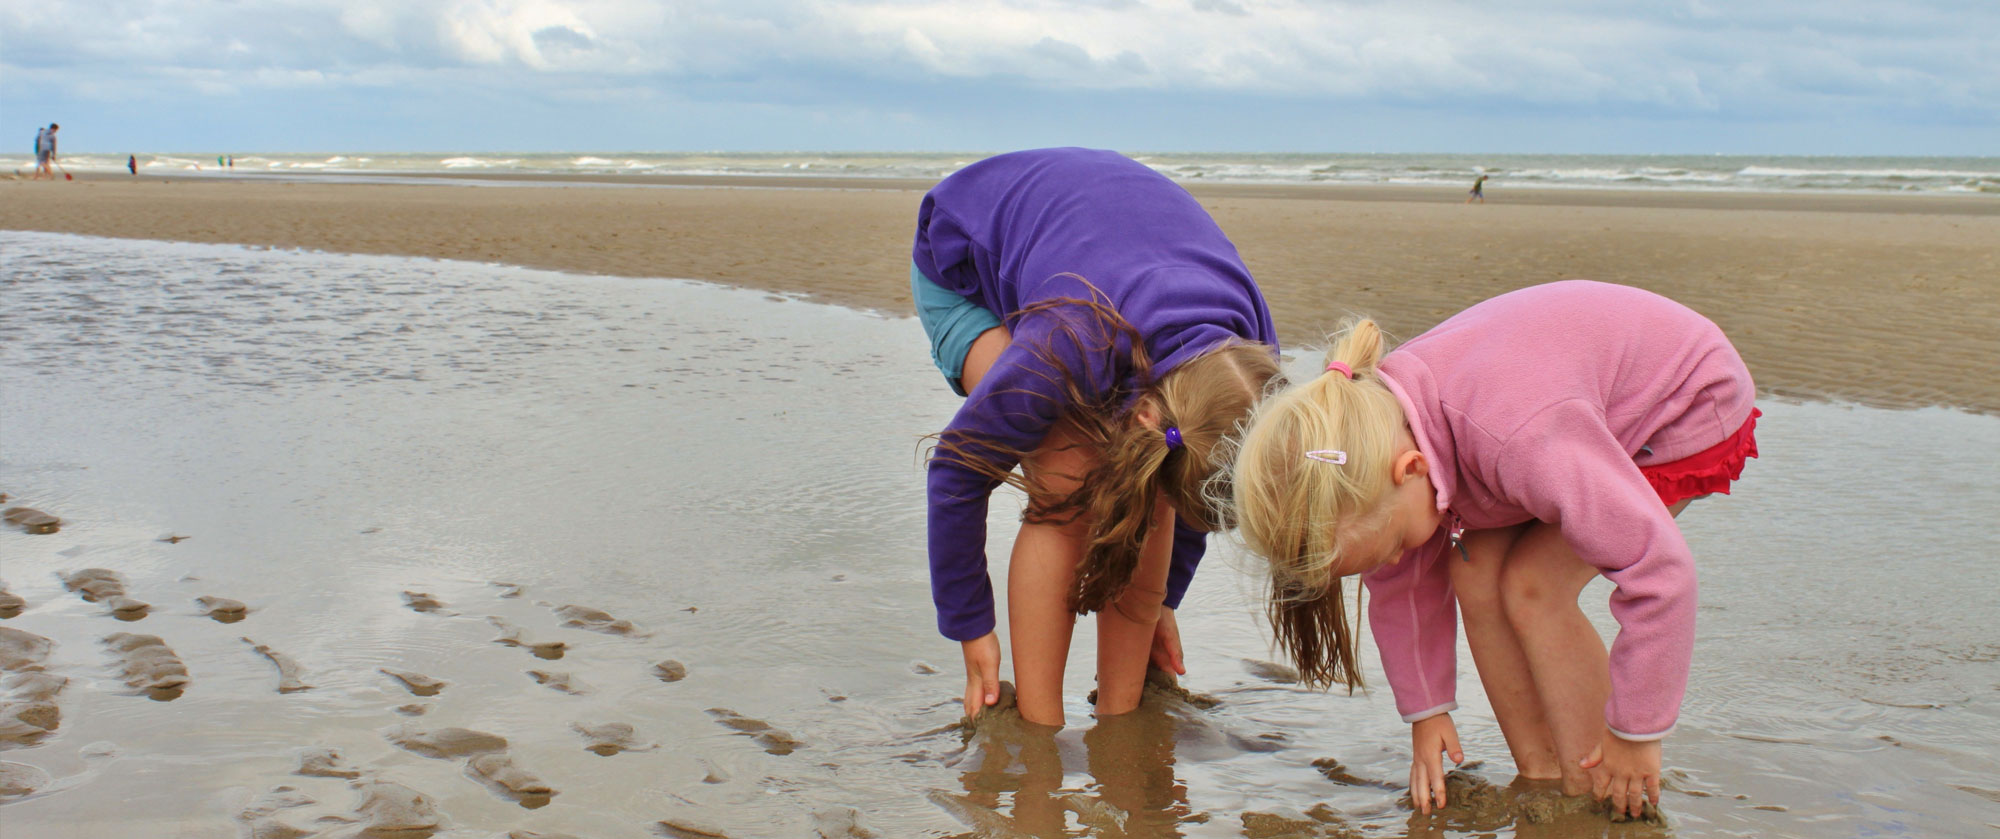 Short breaks with small children – what are the essentials to take with you?